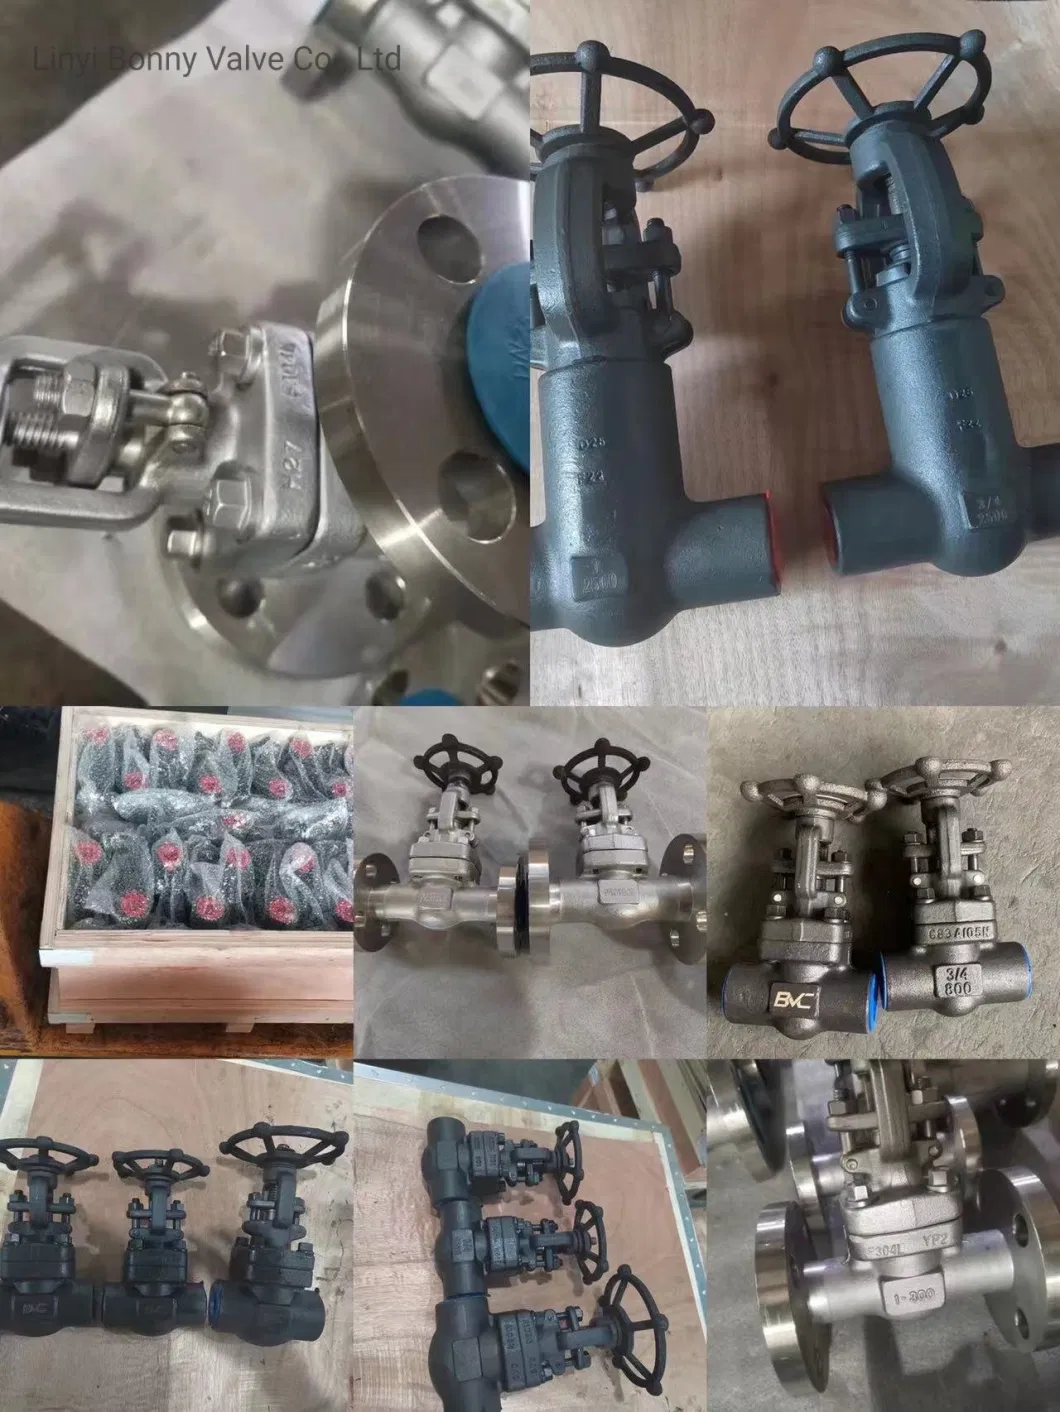 Metal Seat Seal Wedge Gate Angle Globe Valve Double Flange Outside Screw Non Rising Stem Swing Check Valve Handwheel Gear Electric Pneumatic Hydraulic Actuator